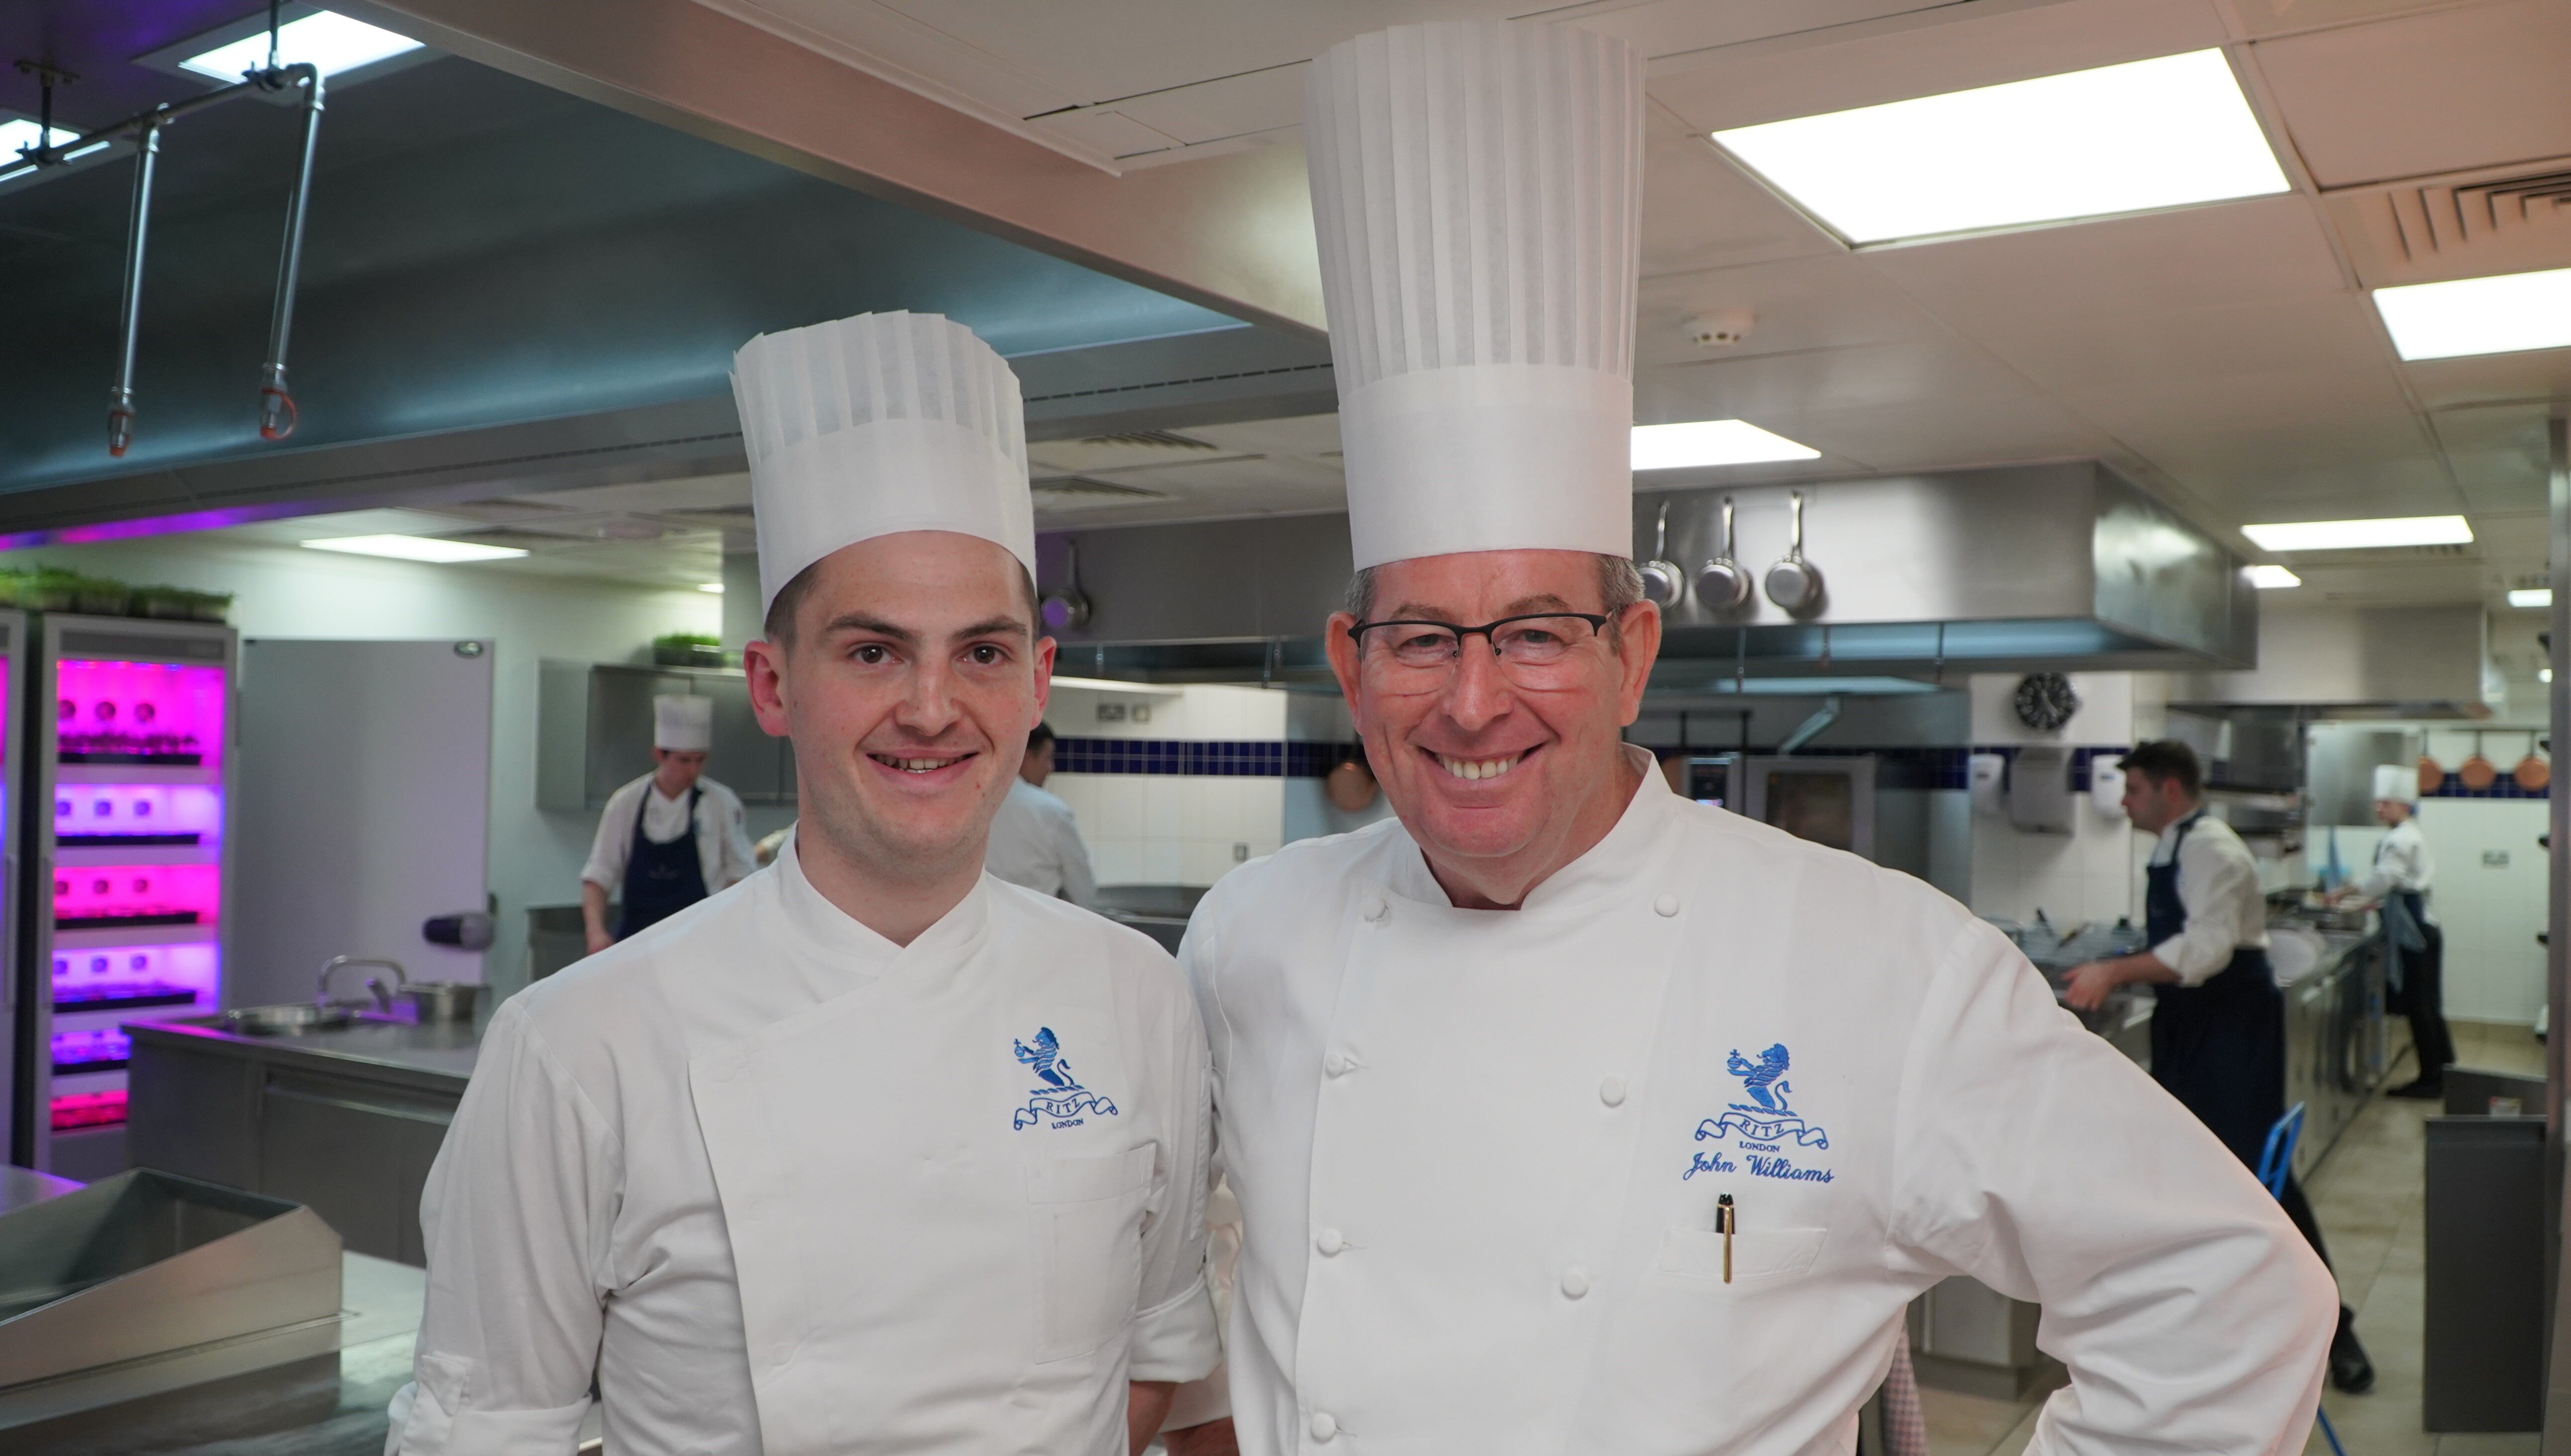 Could you be the next chef at the Ritz?